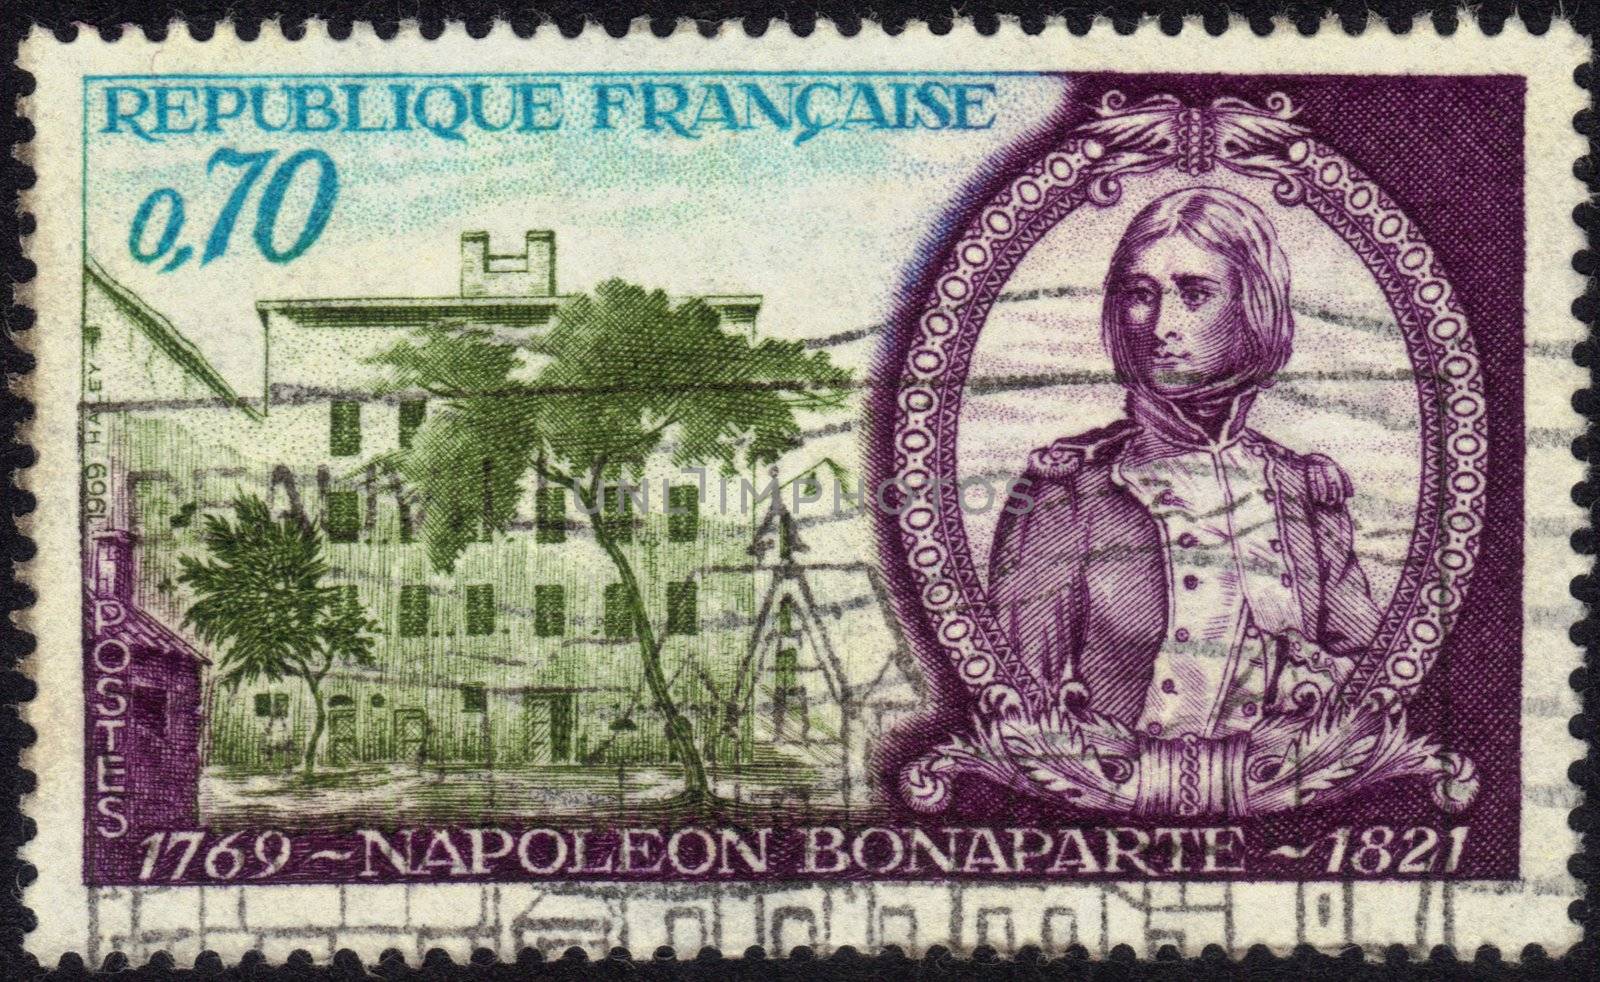 France - CIRCA 1969: A postage stamp printed in France, dedicated to Napoleon Bonaparte bicentenary and showing portrait of the emperor and his house in Ajaccio: circa 1969